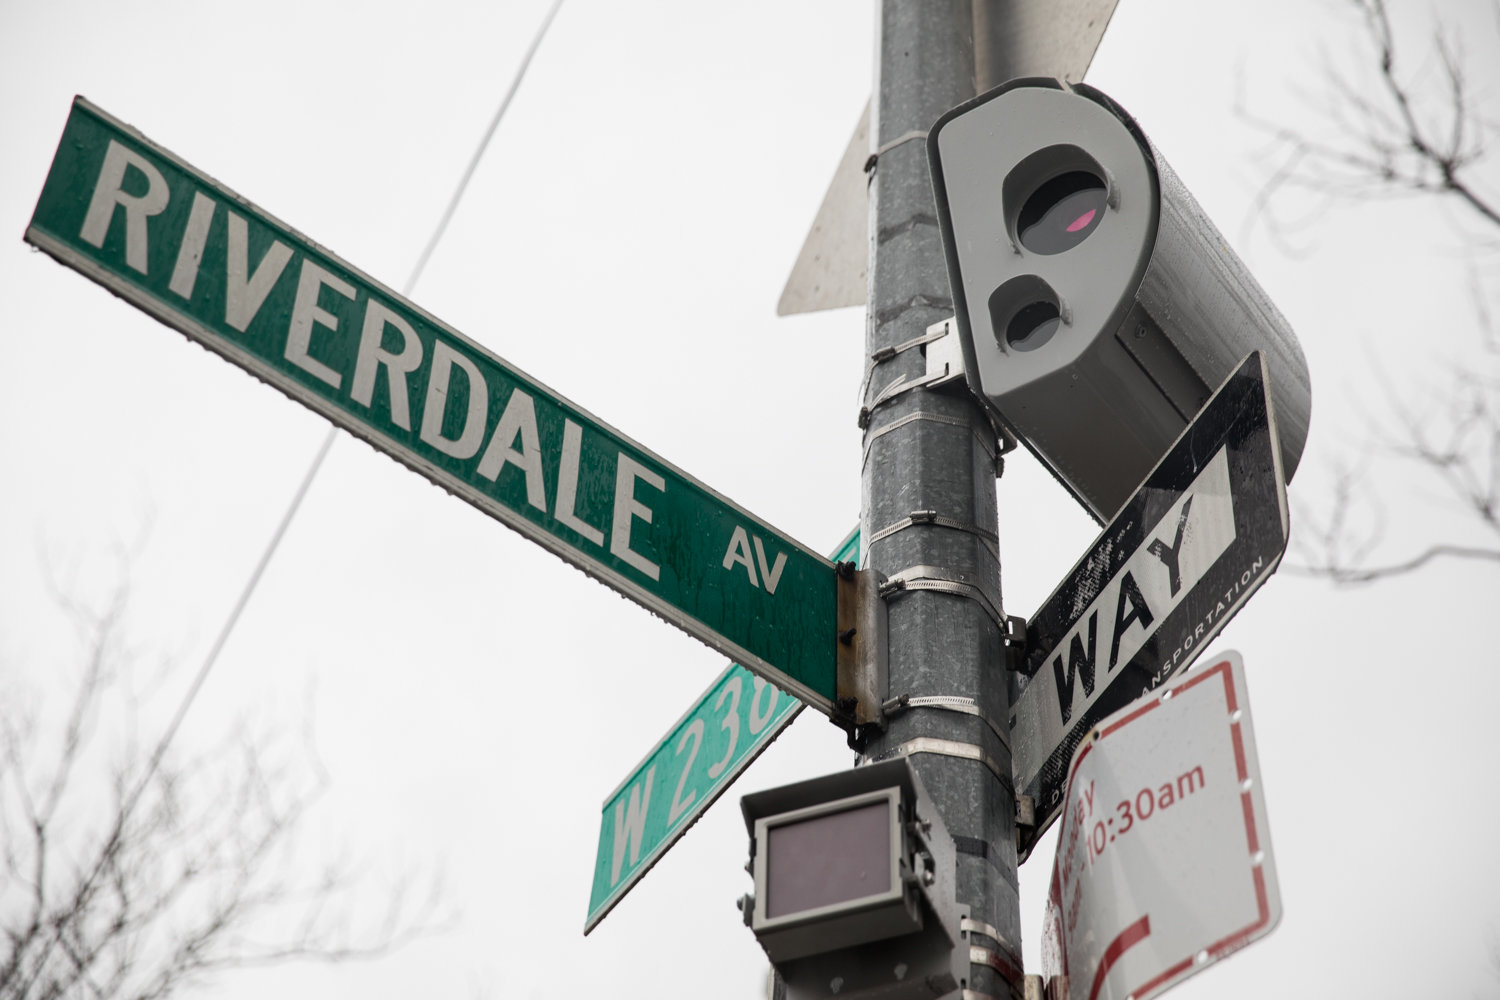 There’s a new speed camera in town on the corner of West 238th Street and Riverdale Avenue, which has earned the ire of some drivers through that neighborhood.